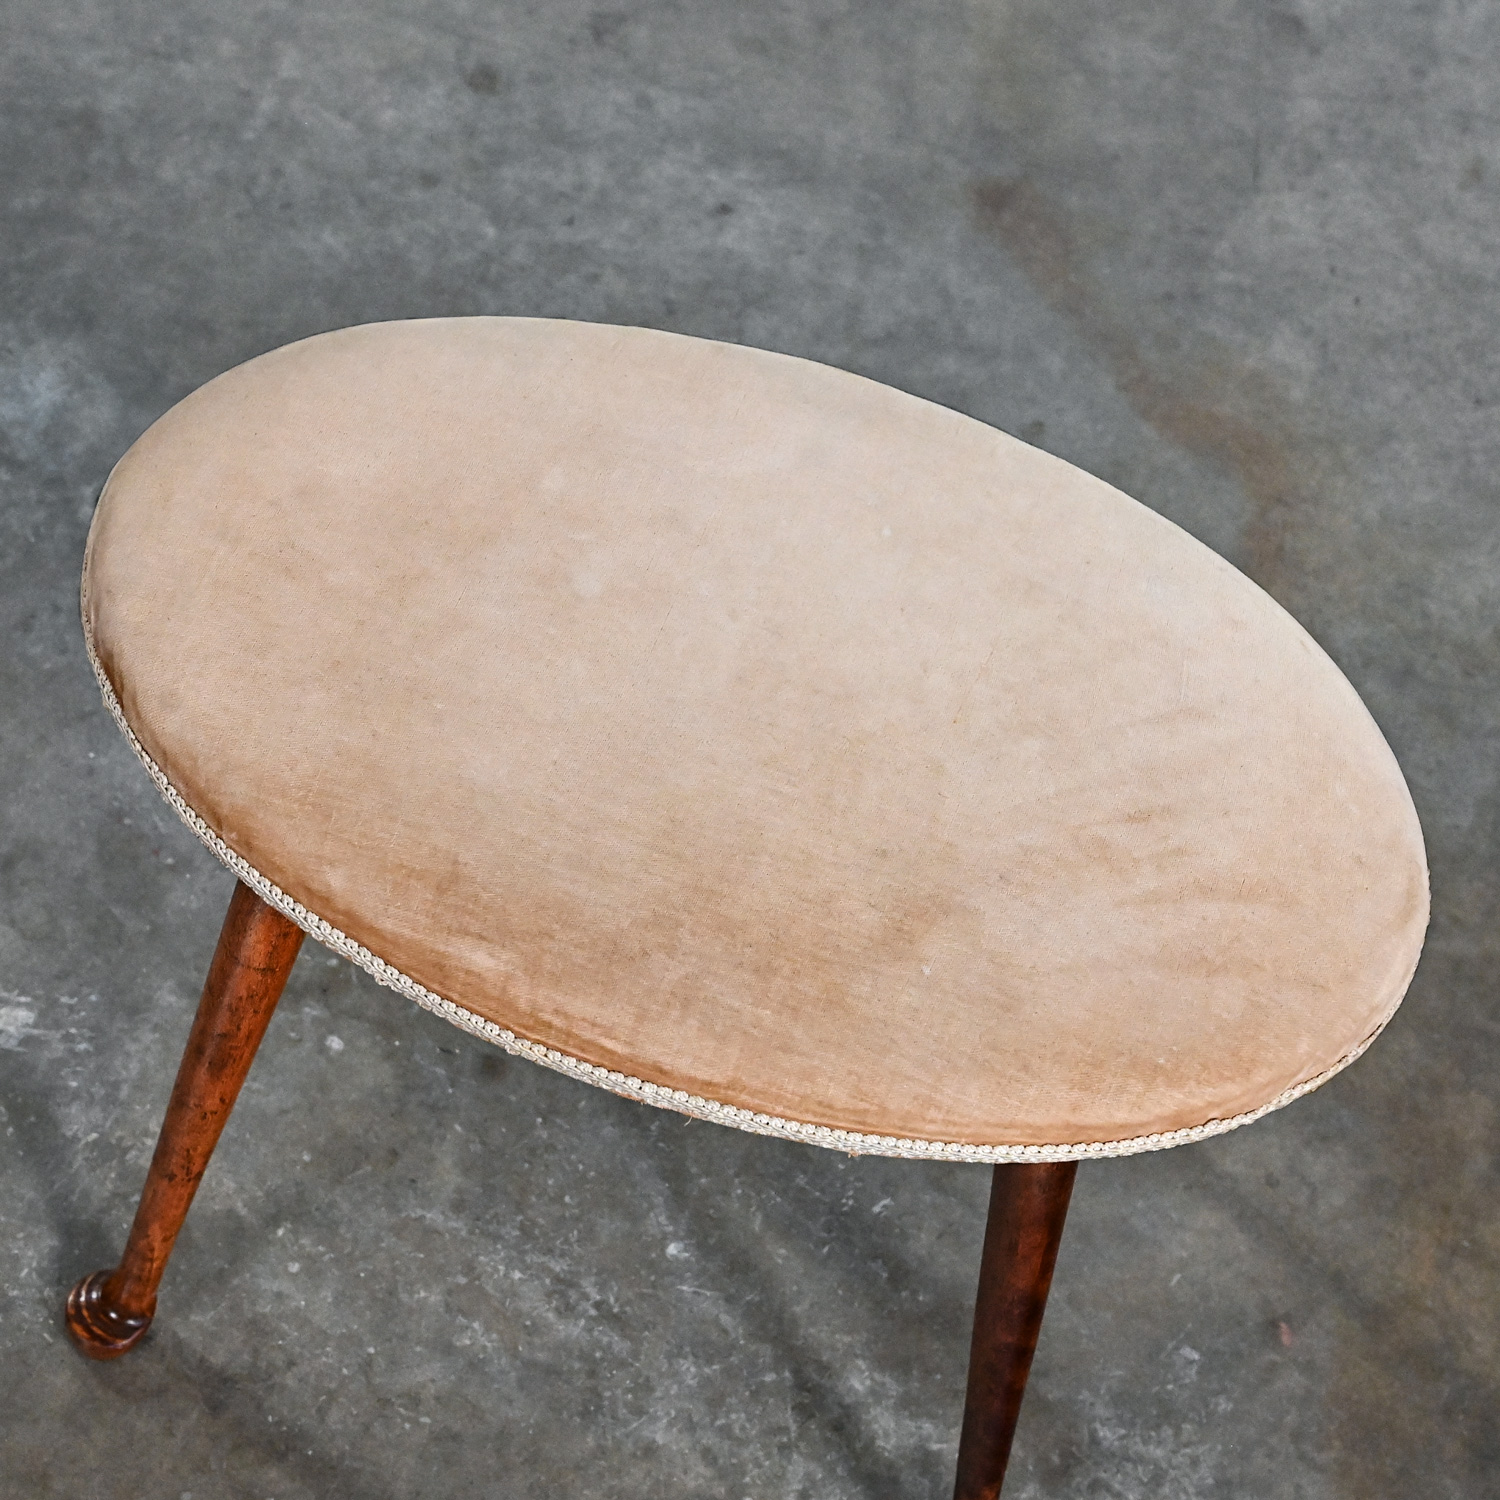 Early 20th Century Colonial Style Low Stool by Conant Ball Oval Seat Tan Velvet Upholstery Maple Legs